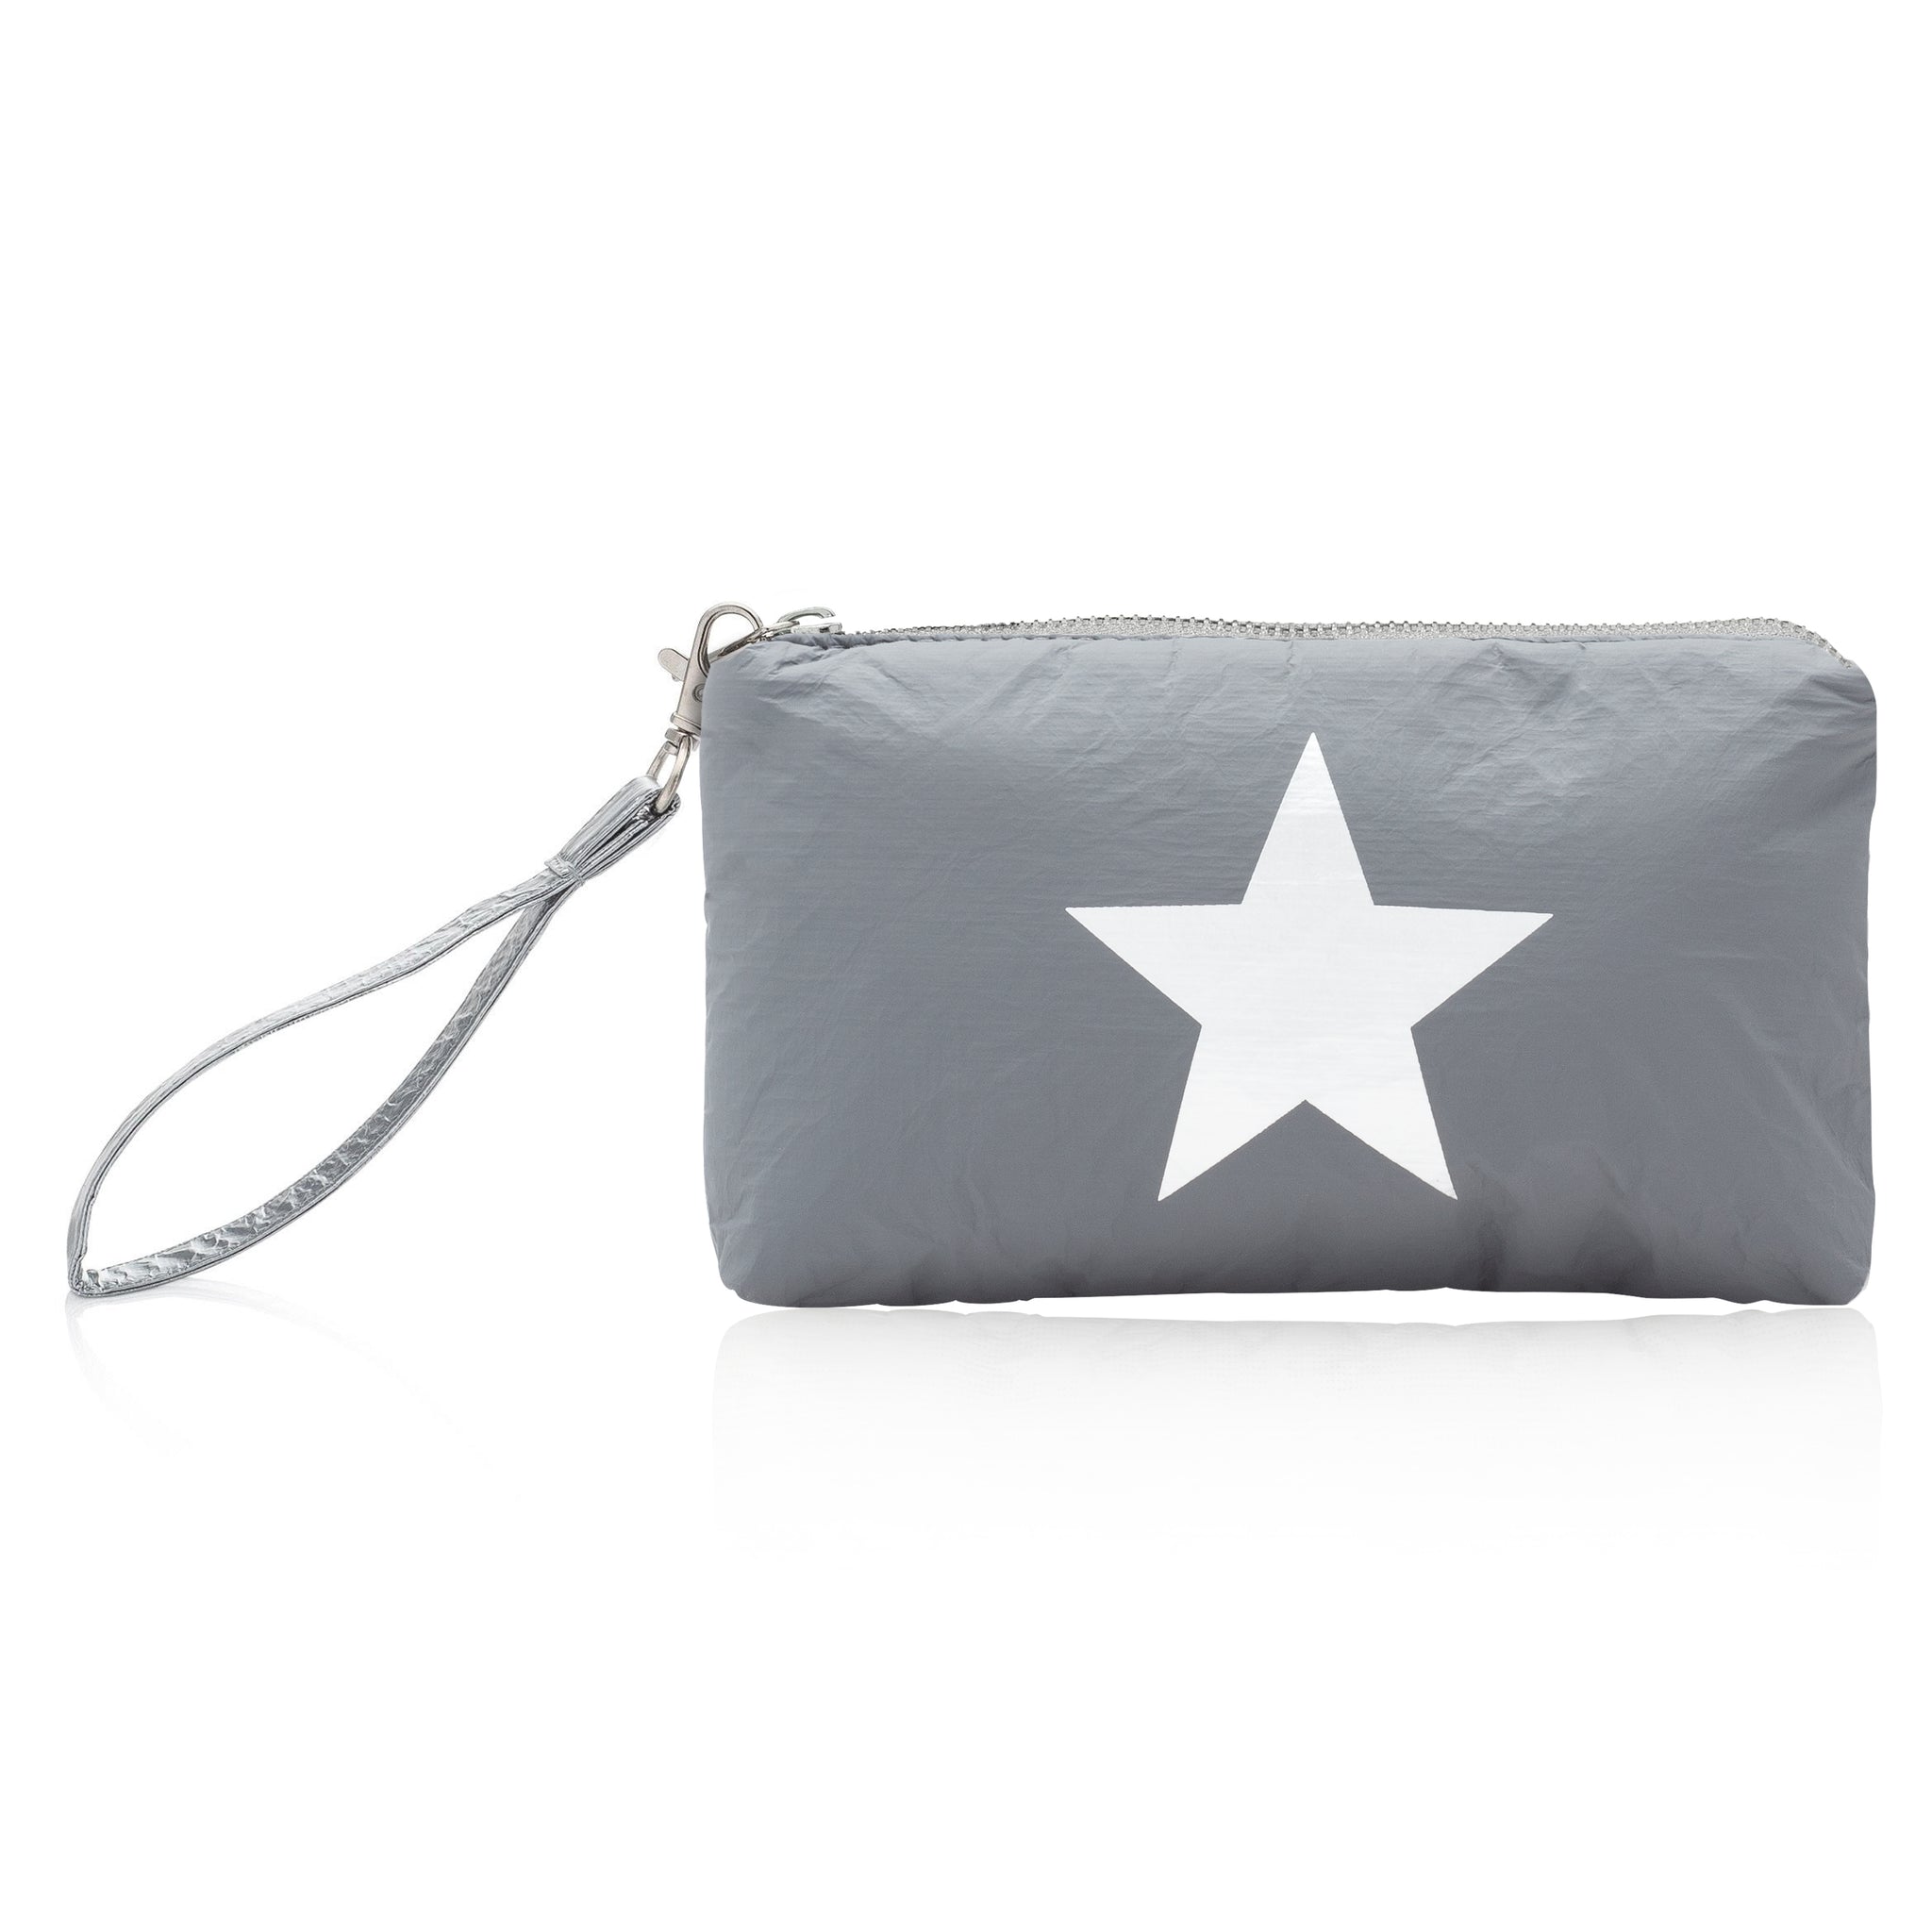 Zip Wristlet in Cool Gray with Silver Star